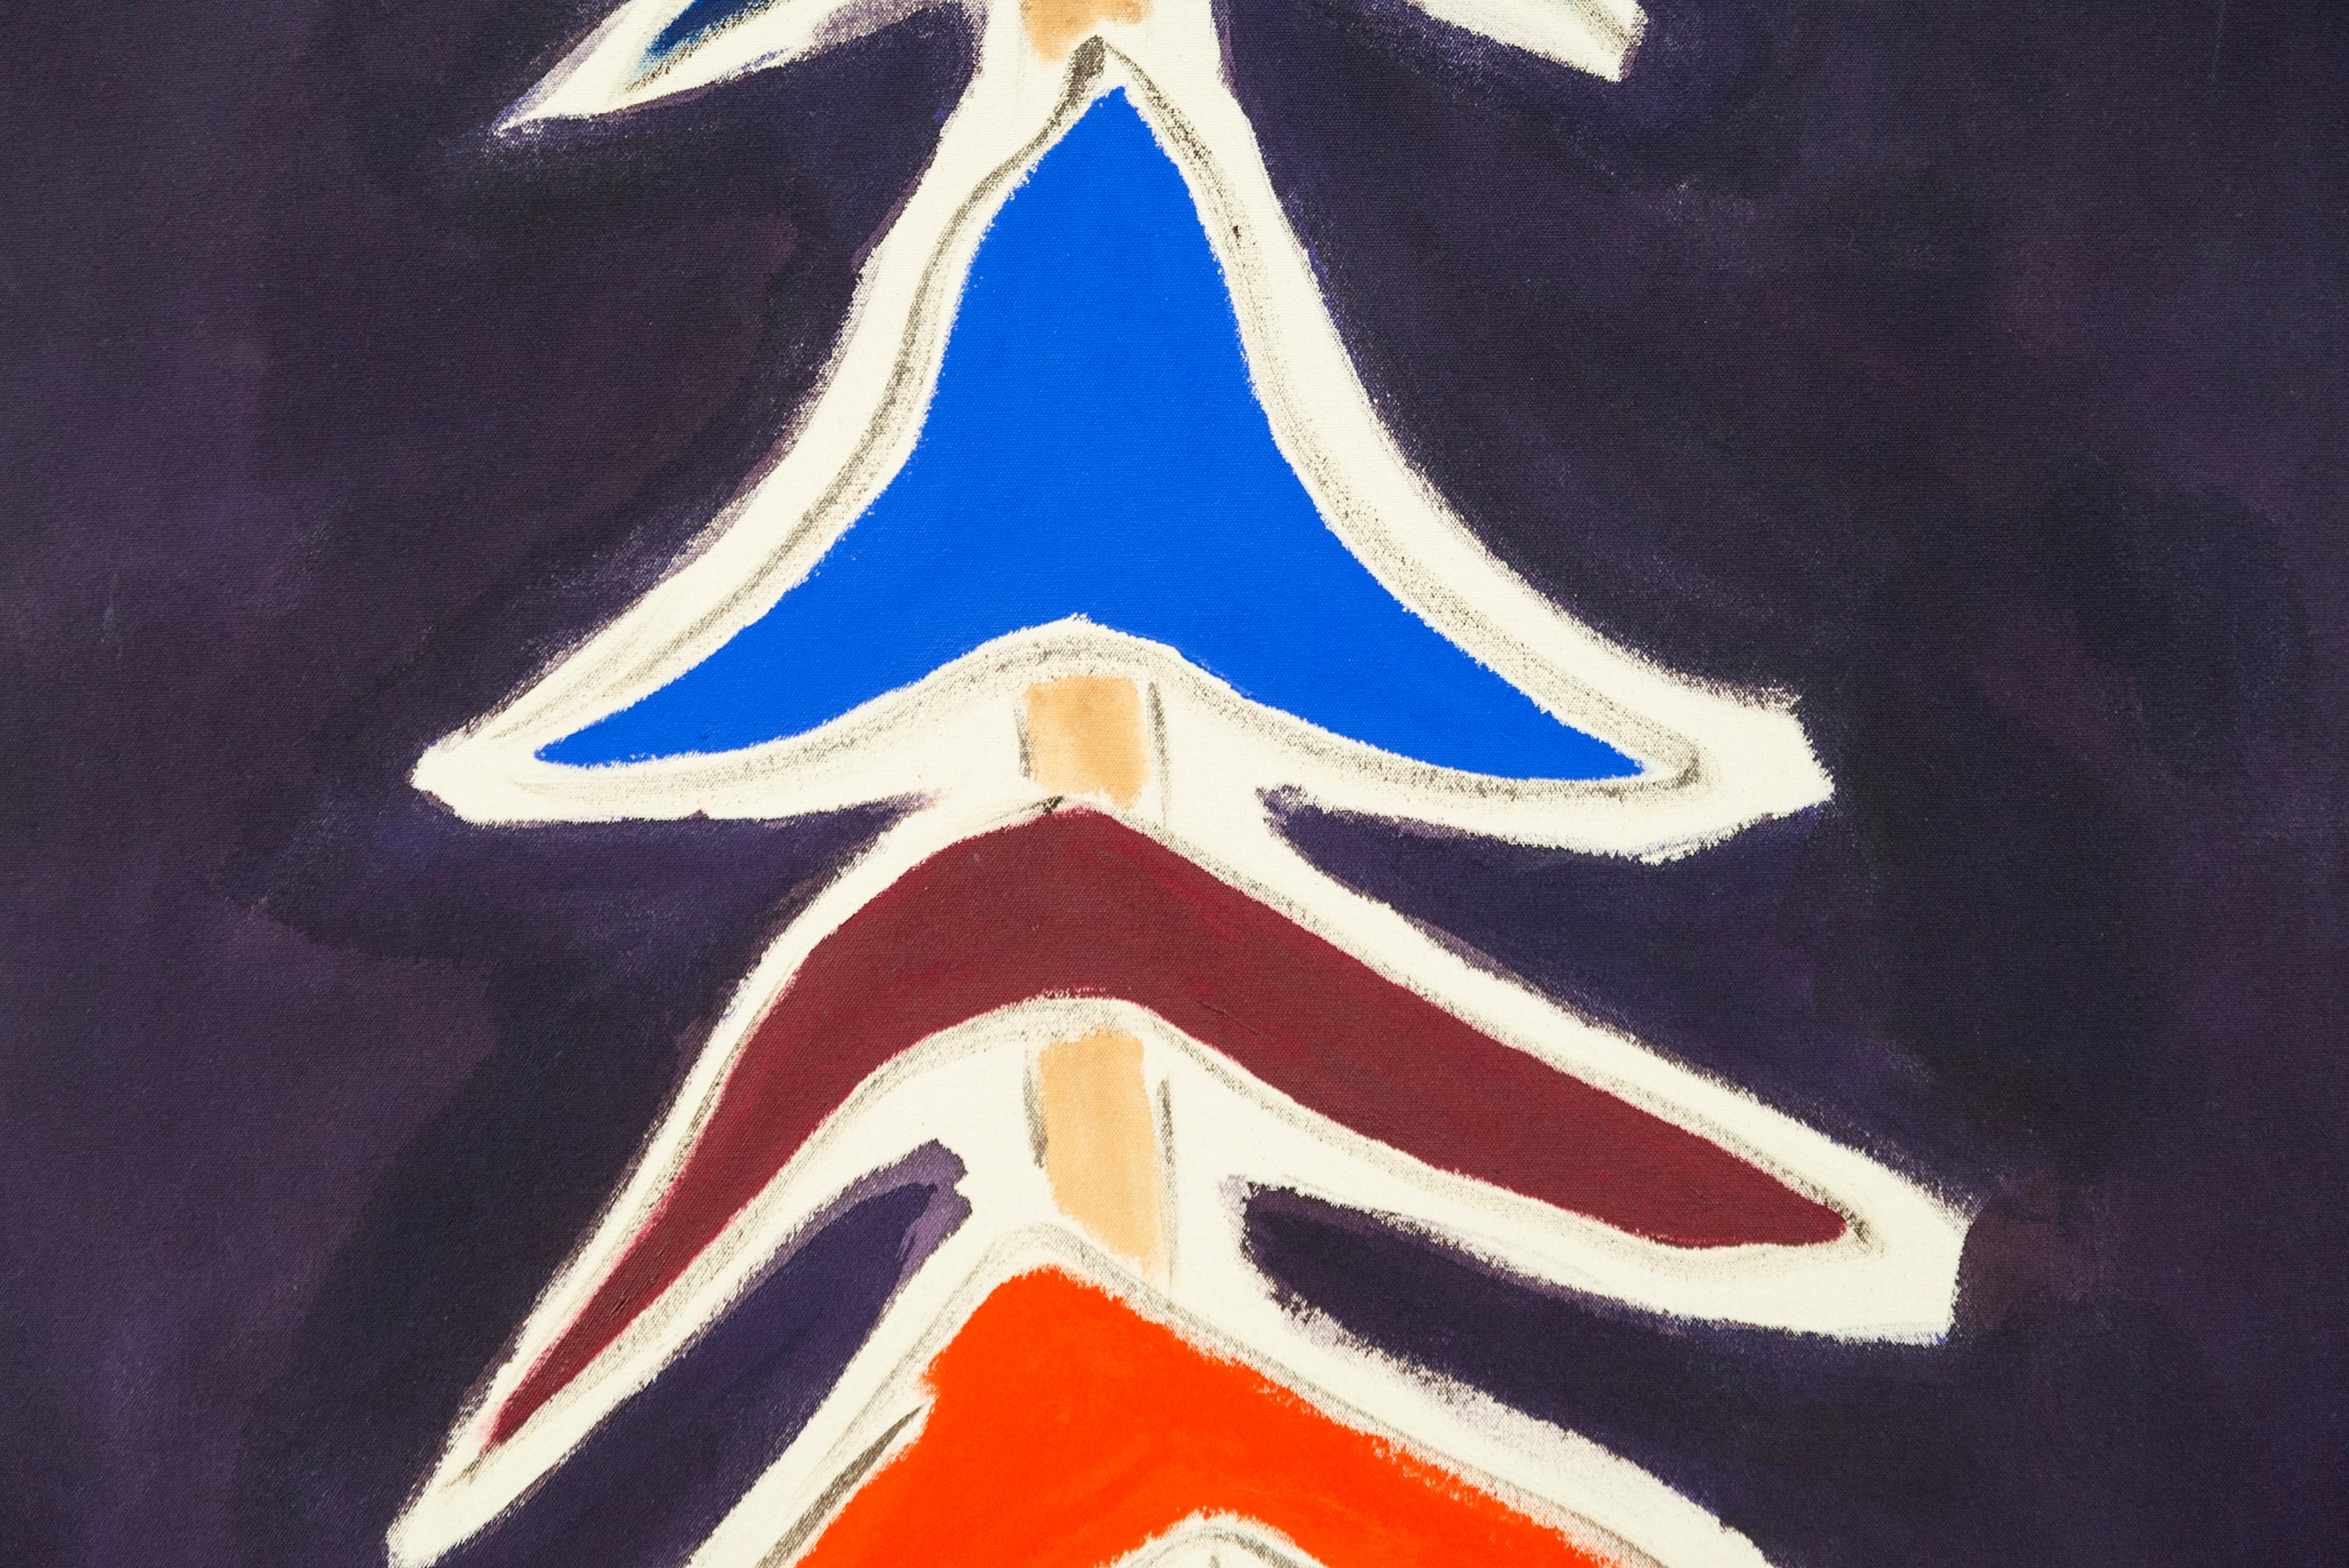 Top Hat - colorful, minimalist, abstracted tree, acrylic on canvas For Sale 1